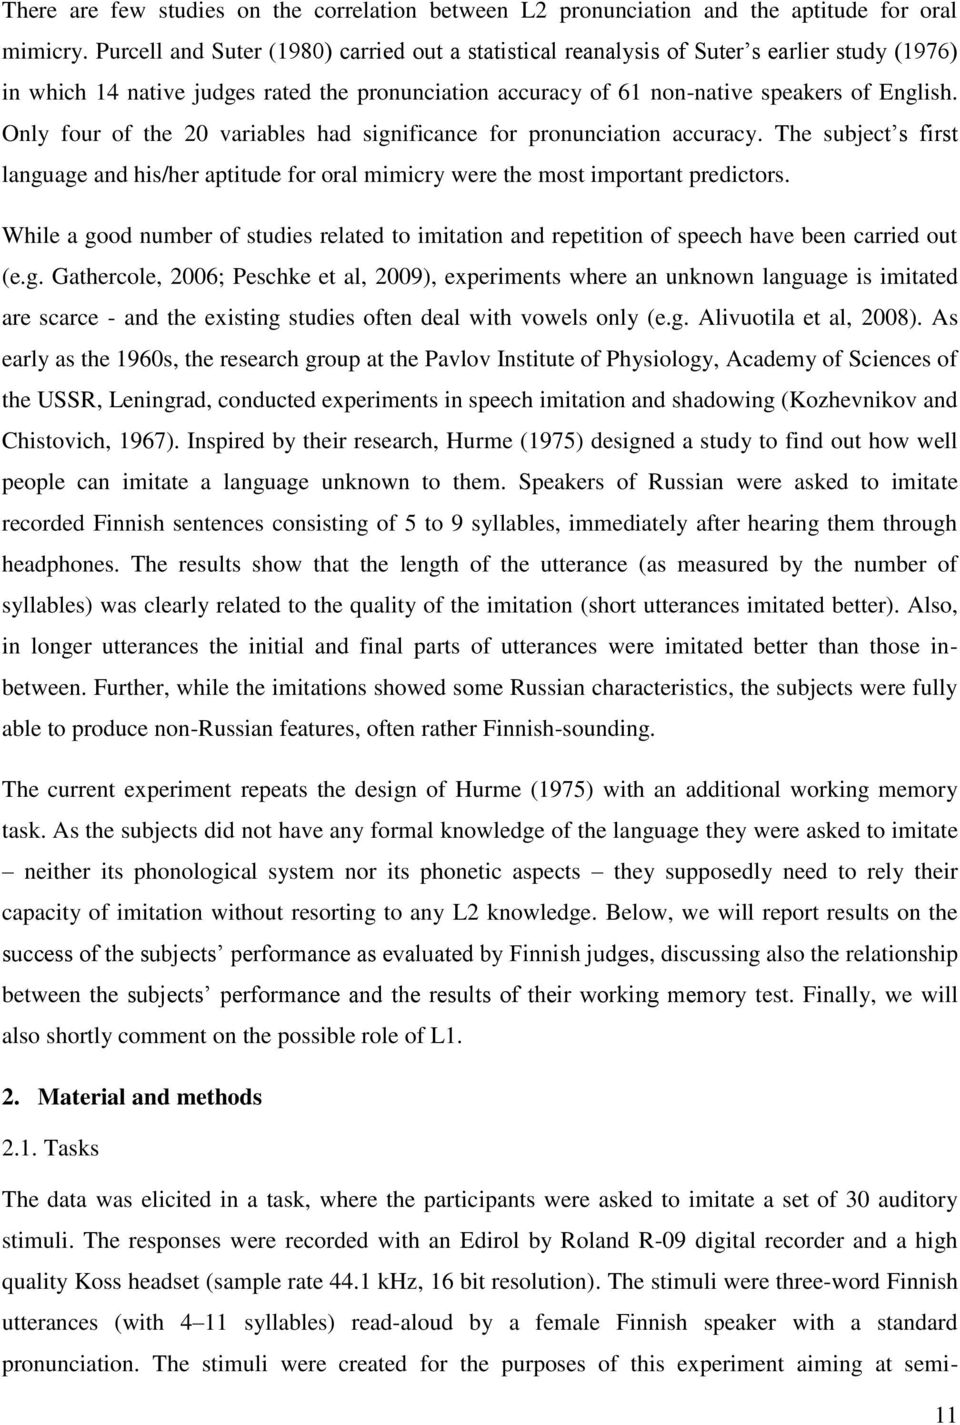 Only four of the 20 variables had significance for pronunciation accuracy. The subject s first language and his/her aptitude for oral mimicry were the most important predictors.